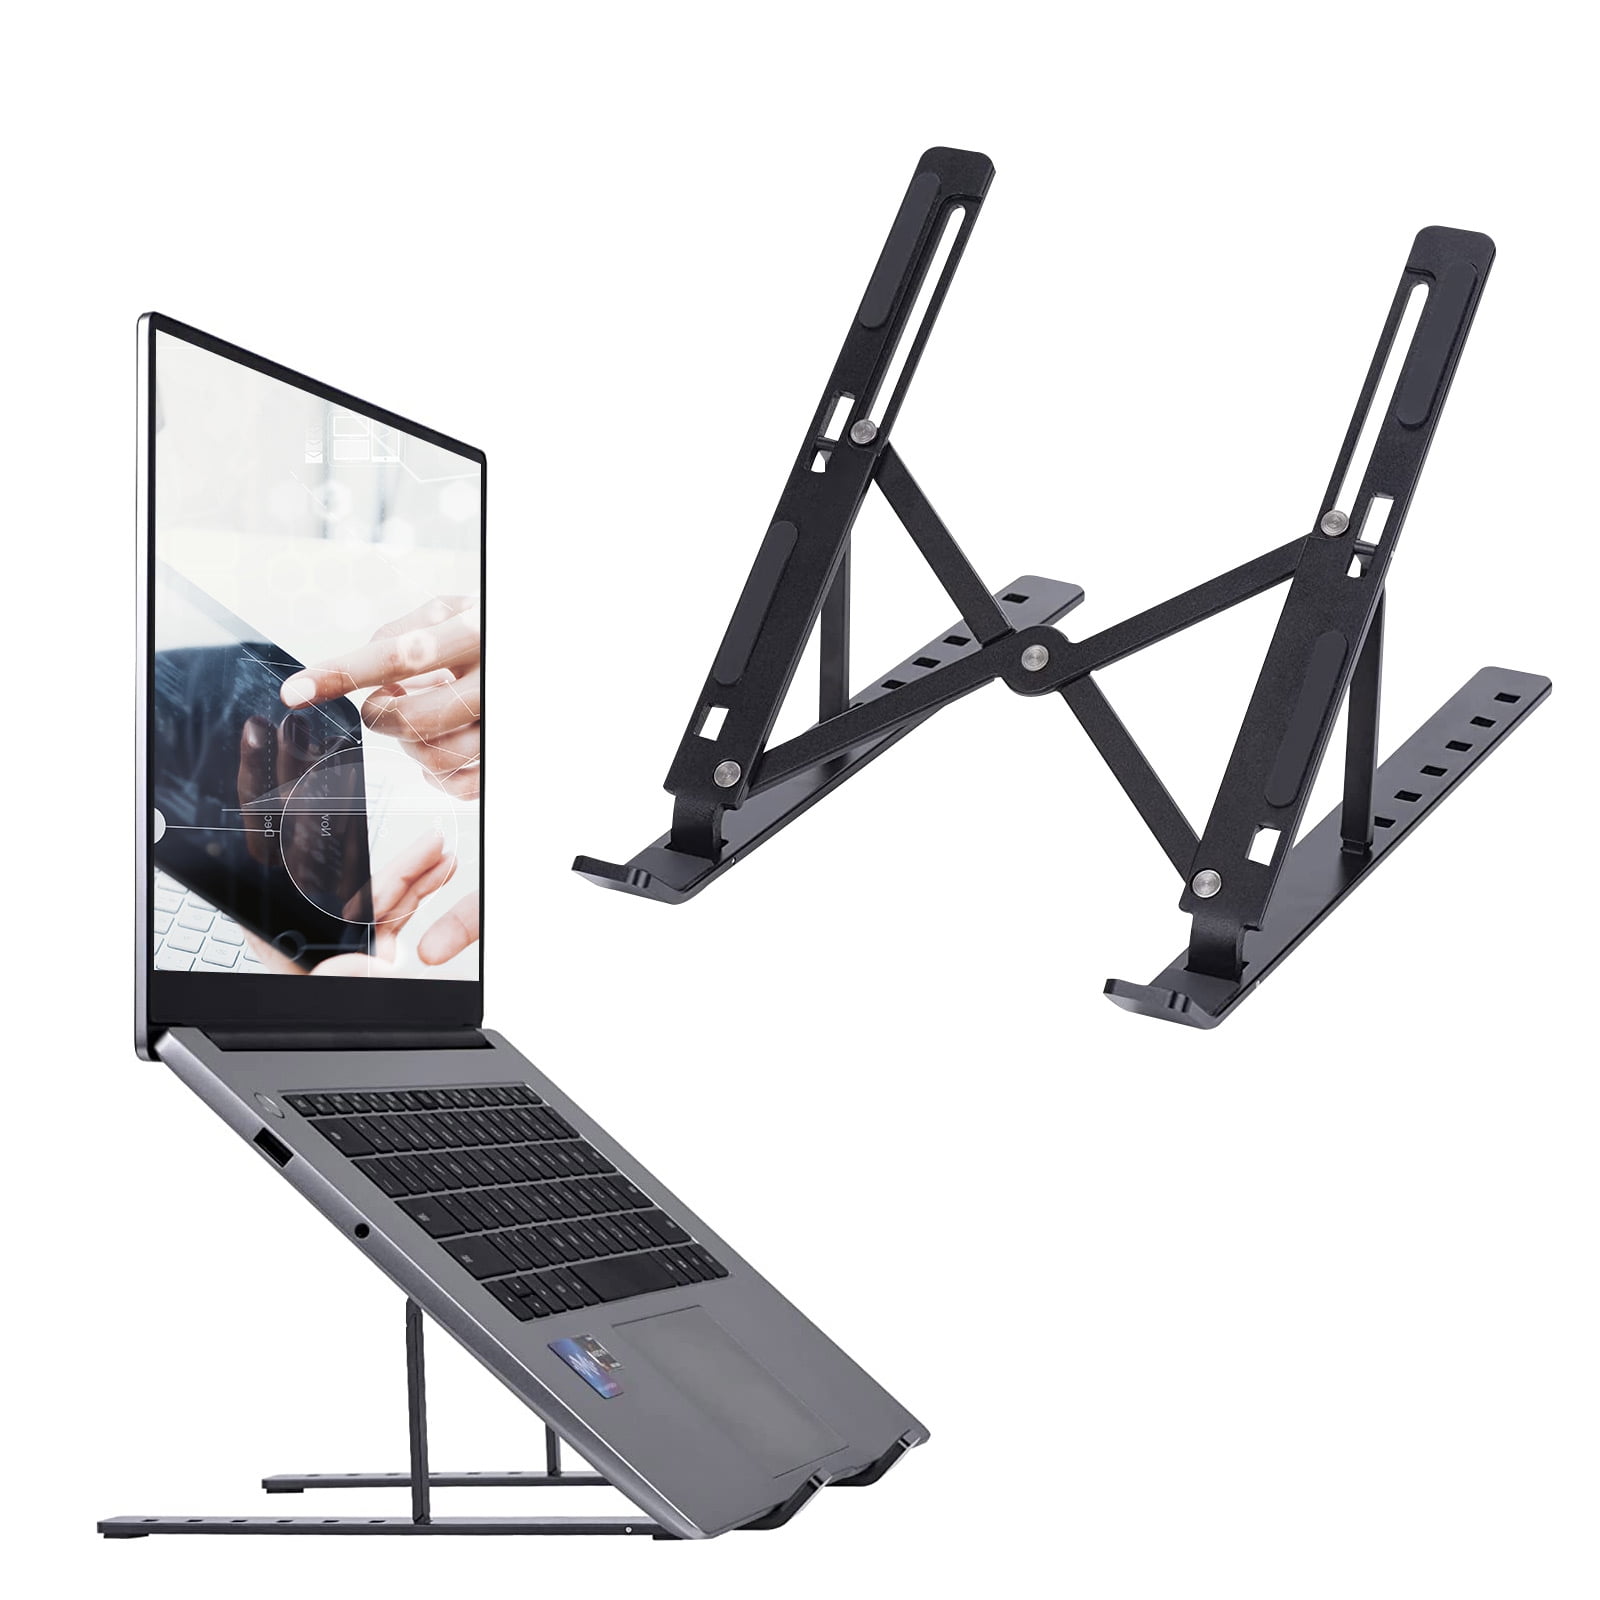 8 Angles Anti-Slip Desktop Riser Compatible with MacBook Dell Lenovo All laptops 10-15.6” Portable Foldable Computer Stand Holder Black HP Laptop Stand for Desk 